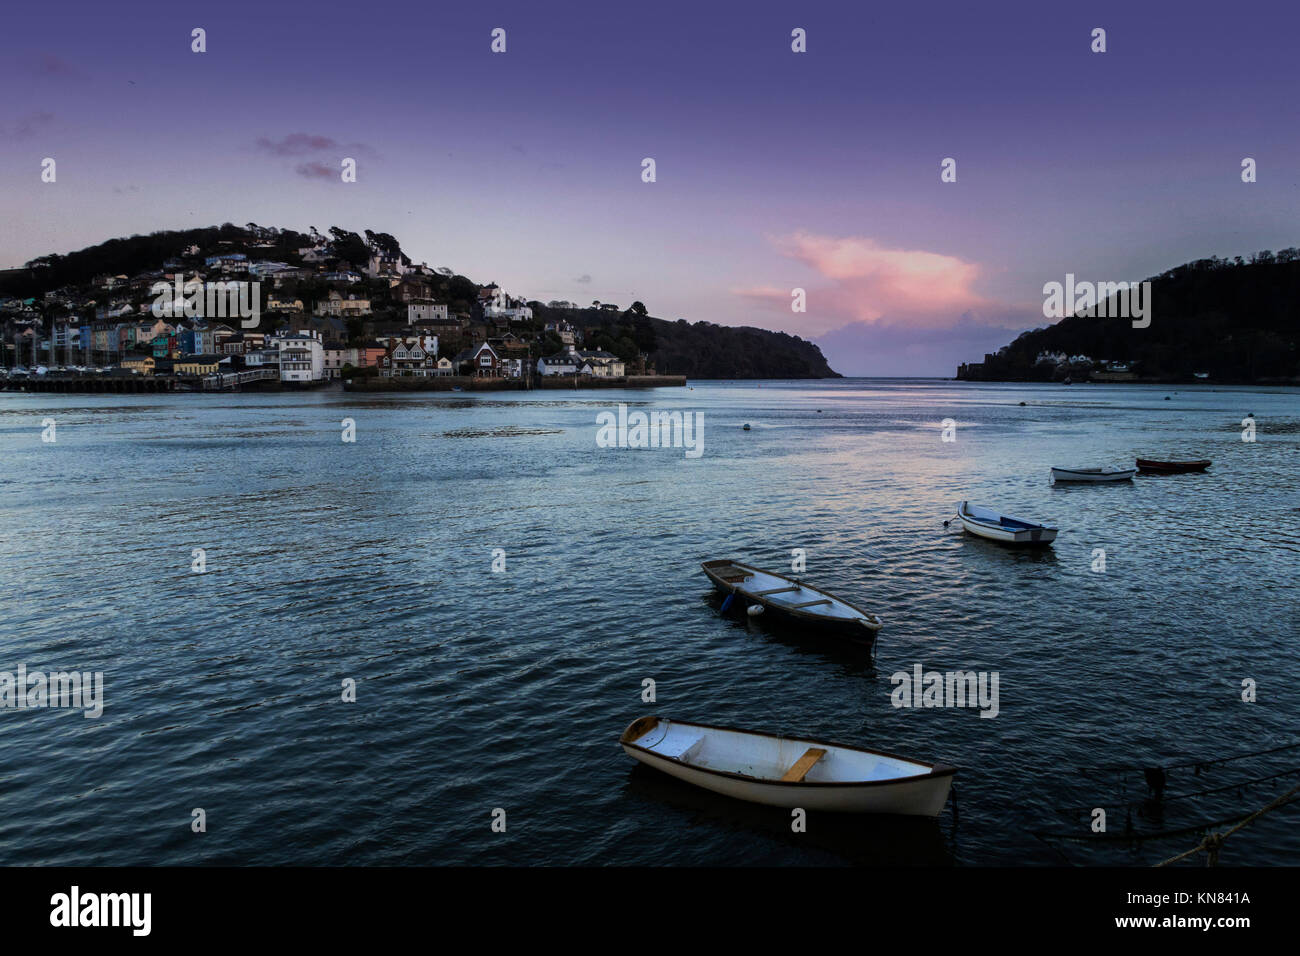 Dartmouth, 10th Dec 17 With the rest of the UK suffering freezing temperatures, the South West was the exception, with double figure temperatures across most of Devon. A few boats are seen on the river Dart as sunset falls in Dartmouth. Photo Central/Alamy Live News Stock Photo